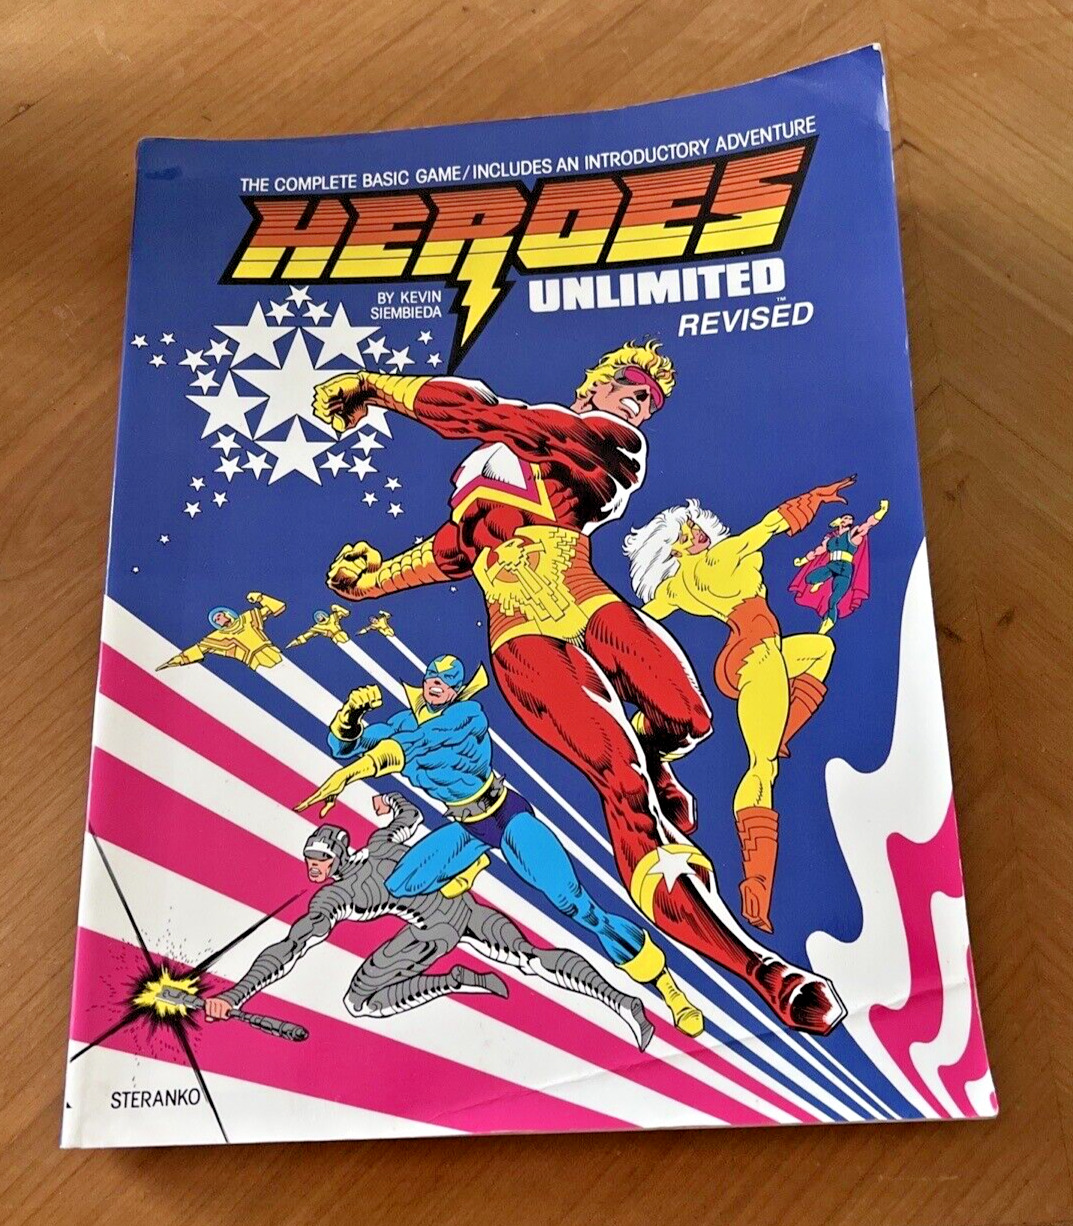 Vintage 1996 Heroes Unlimited Book Autographed Kevin Siembieda Illustrated 